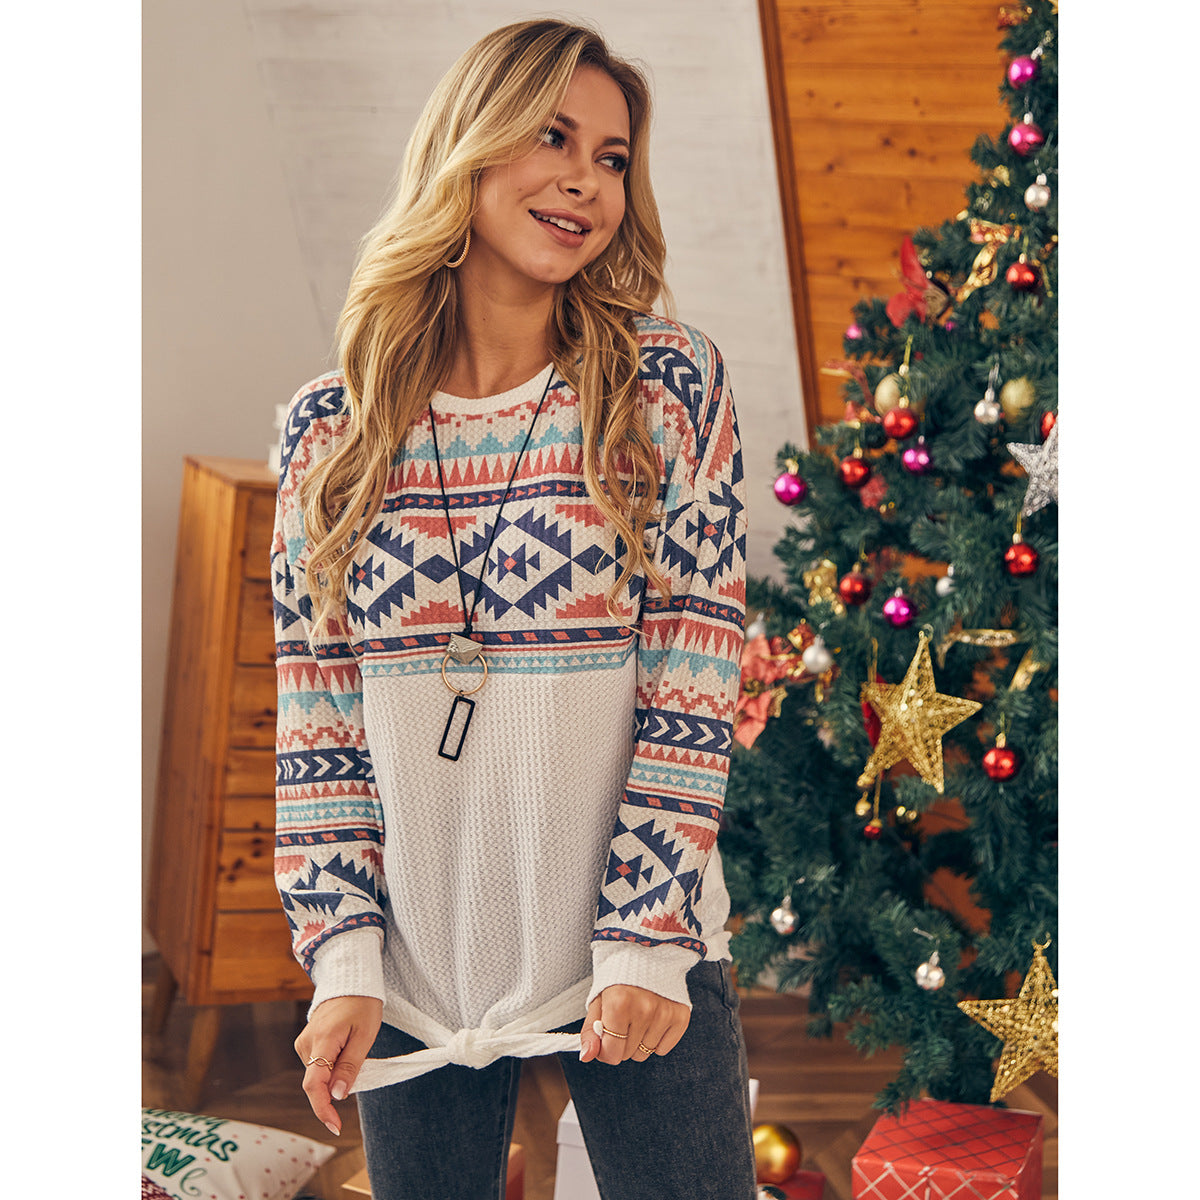 Women’s Sweater - Women's Fashionable Elegant Christmas Element Knitted Top